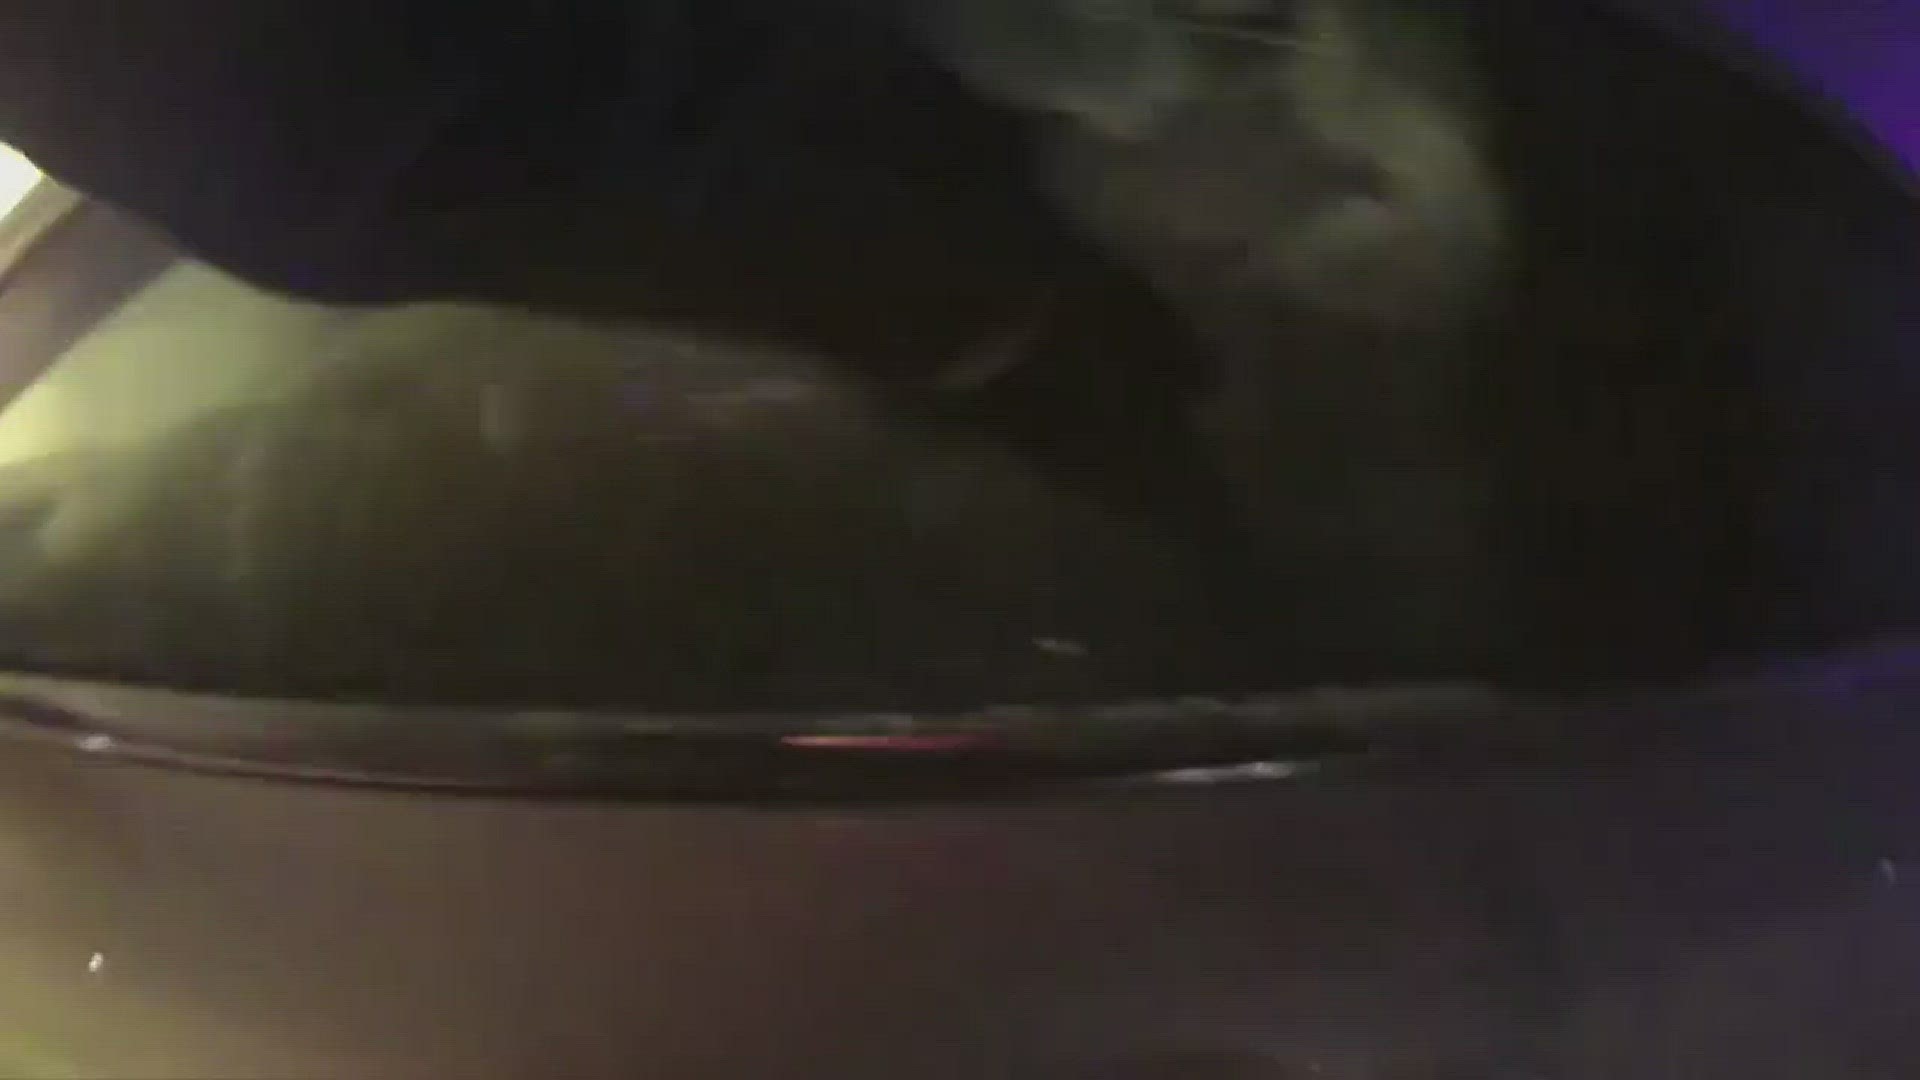 Watch a Spokane police officer smash a window and pull a woman to safety.